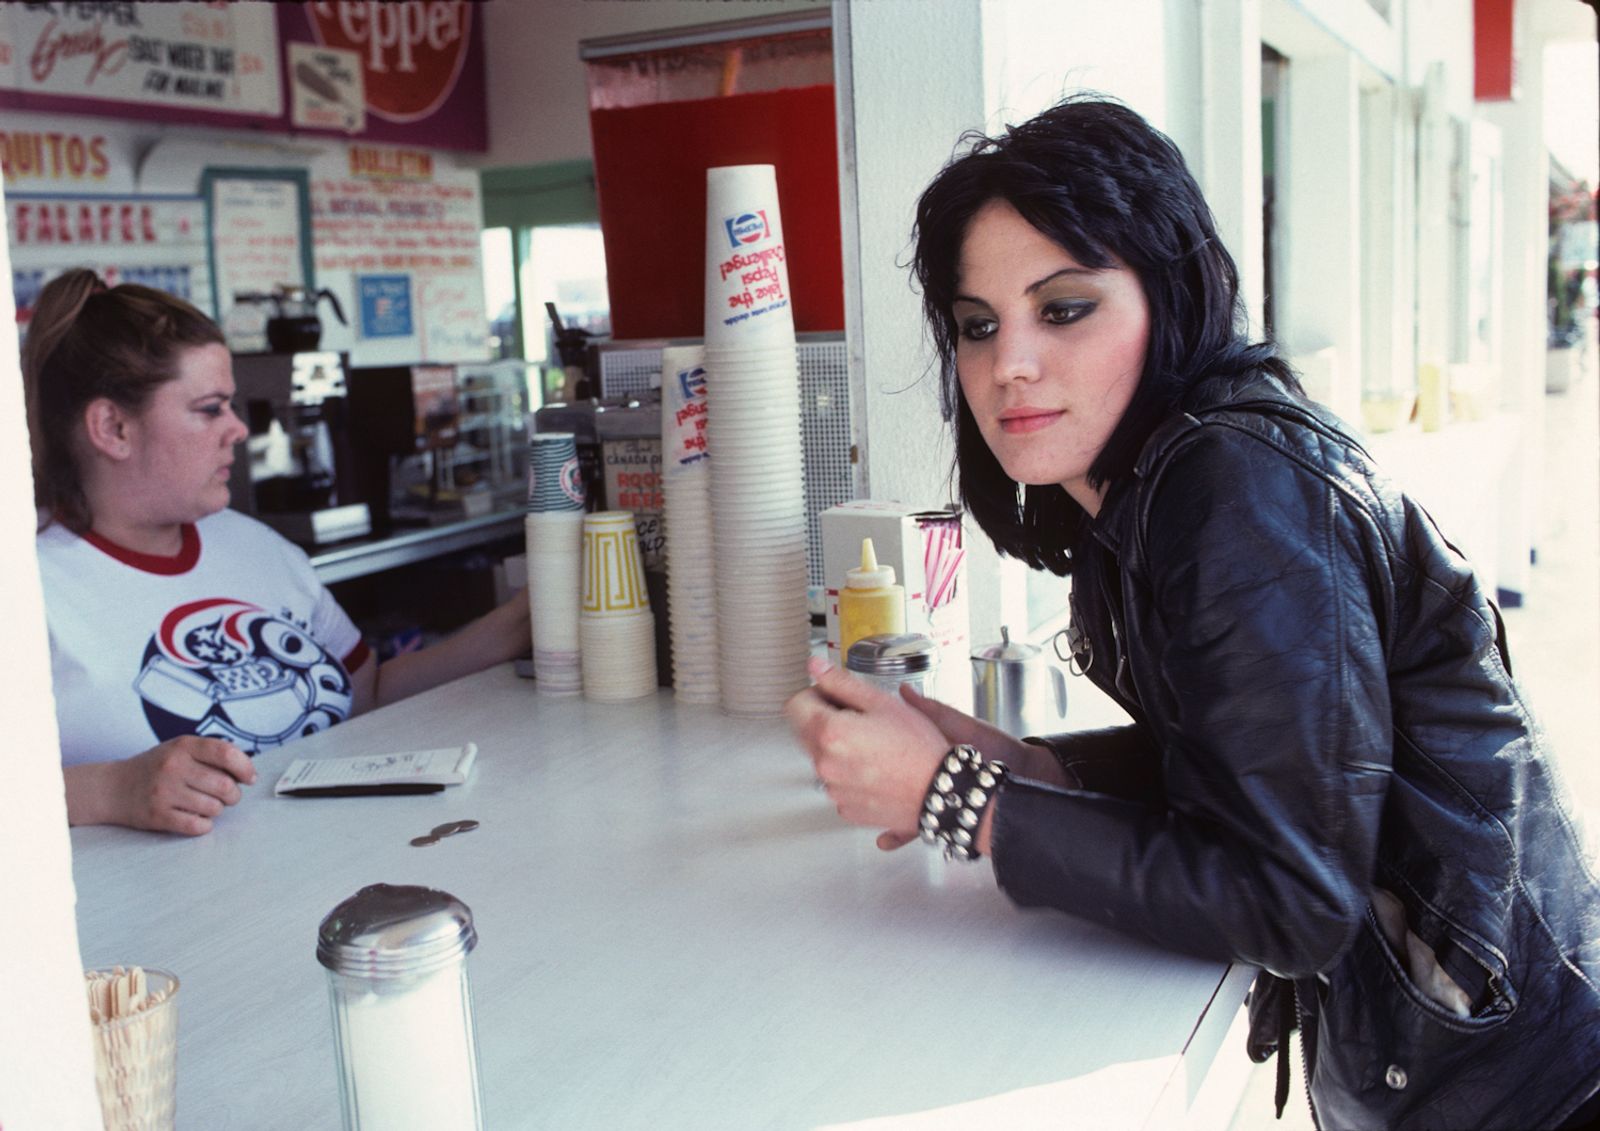 Joan Jett About To Have A Snack!